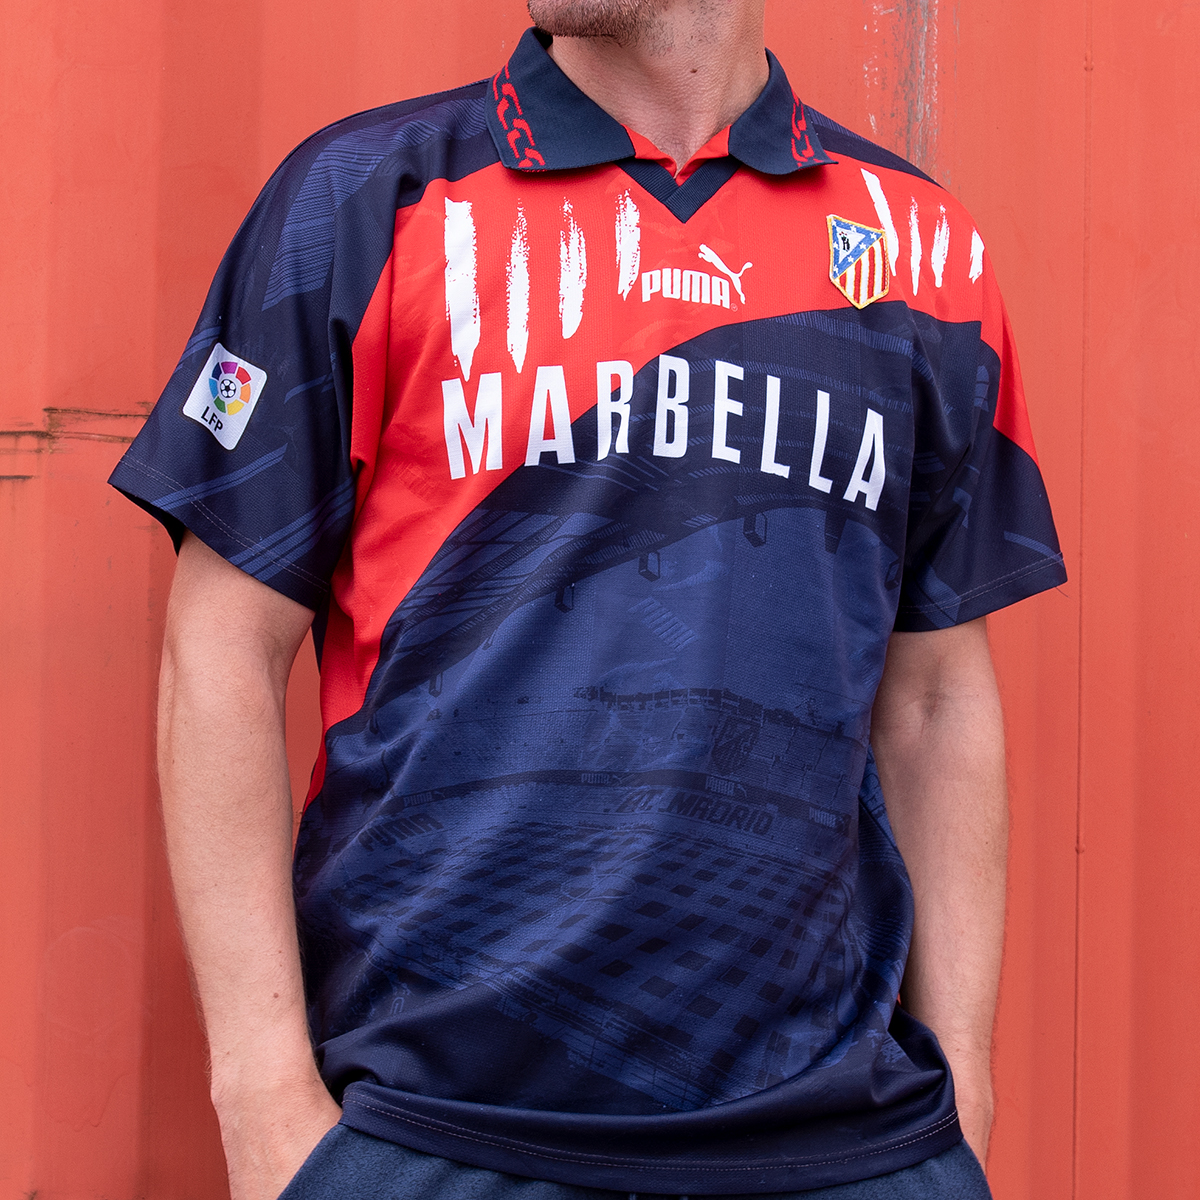 Classic Football Shirts Twitter: "Atlético Madrid 1995 Away by Puma 🇪🇸 Featuring the Vincente Calderón within the design! Hitting the site on June 15th! https://t.co/eKhcaikyBo" / Twitter